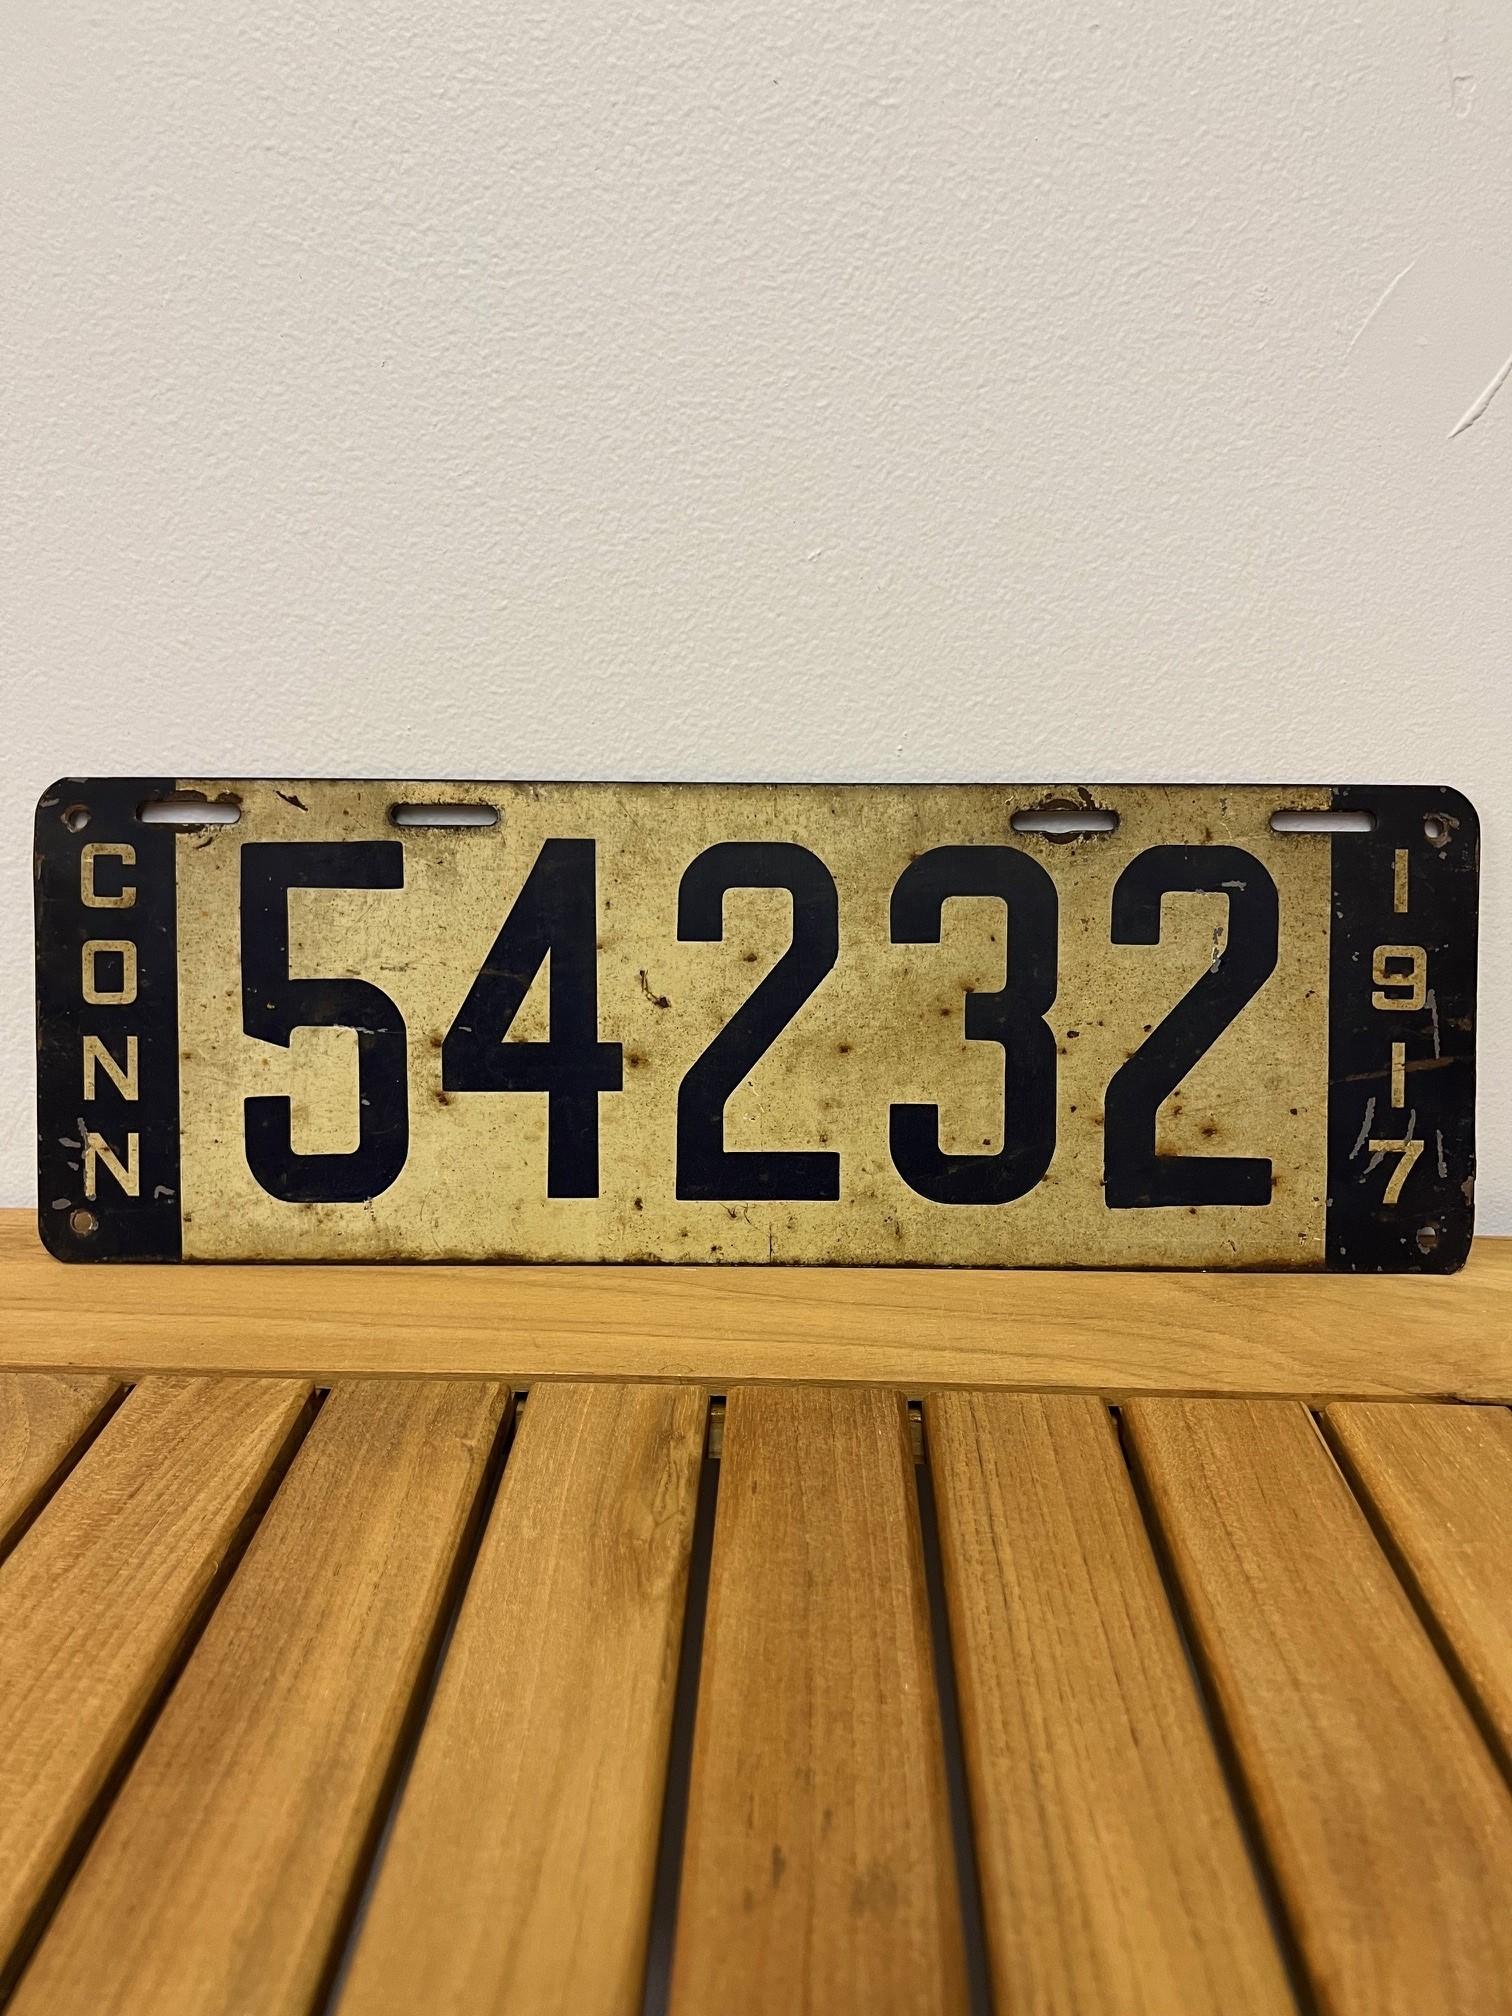 This is an original 1917 Connecticut automobile license plate with a six digit number 54232. It would look great on a classic car or a nice addition to a license plate collection. It's in good condition but has some marks and scratches shown in the